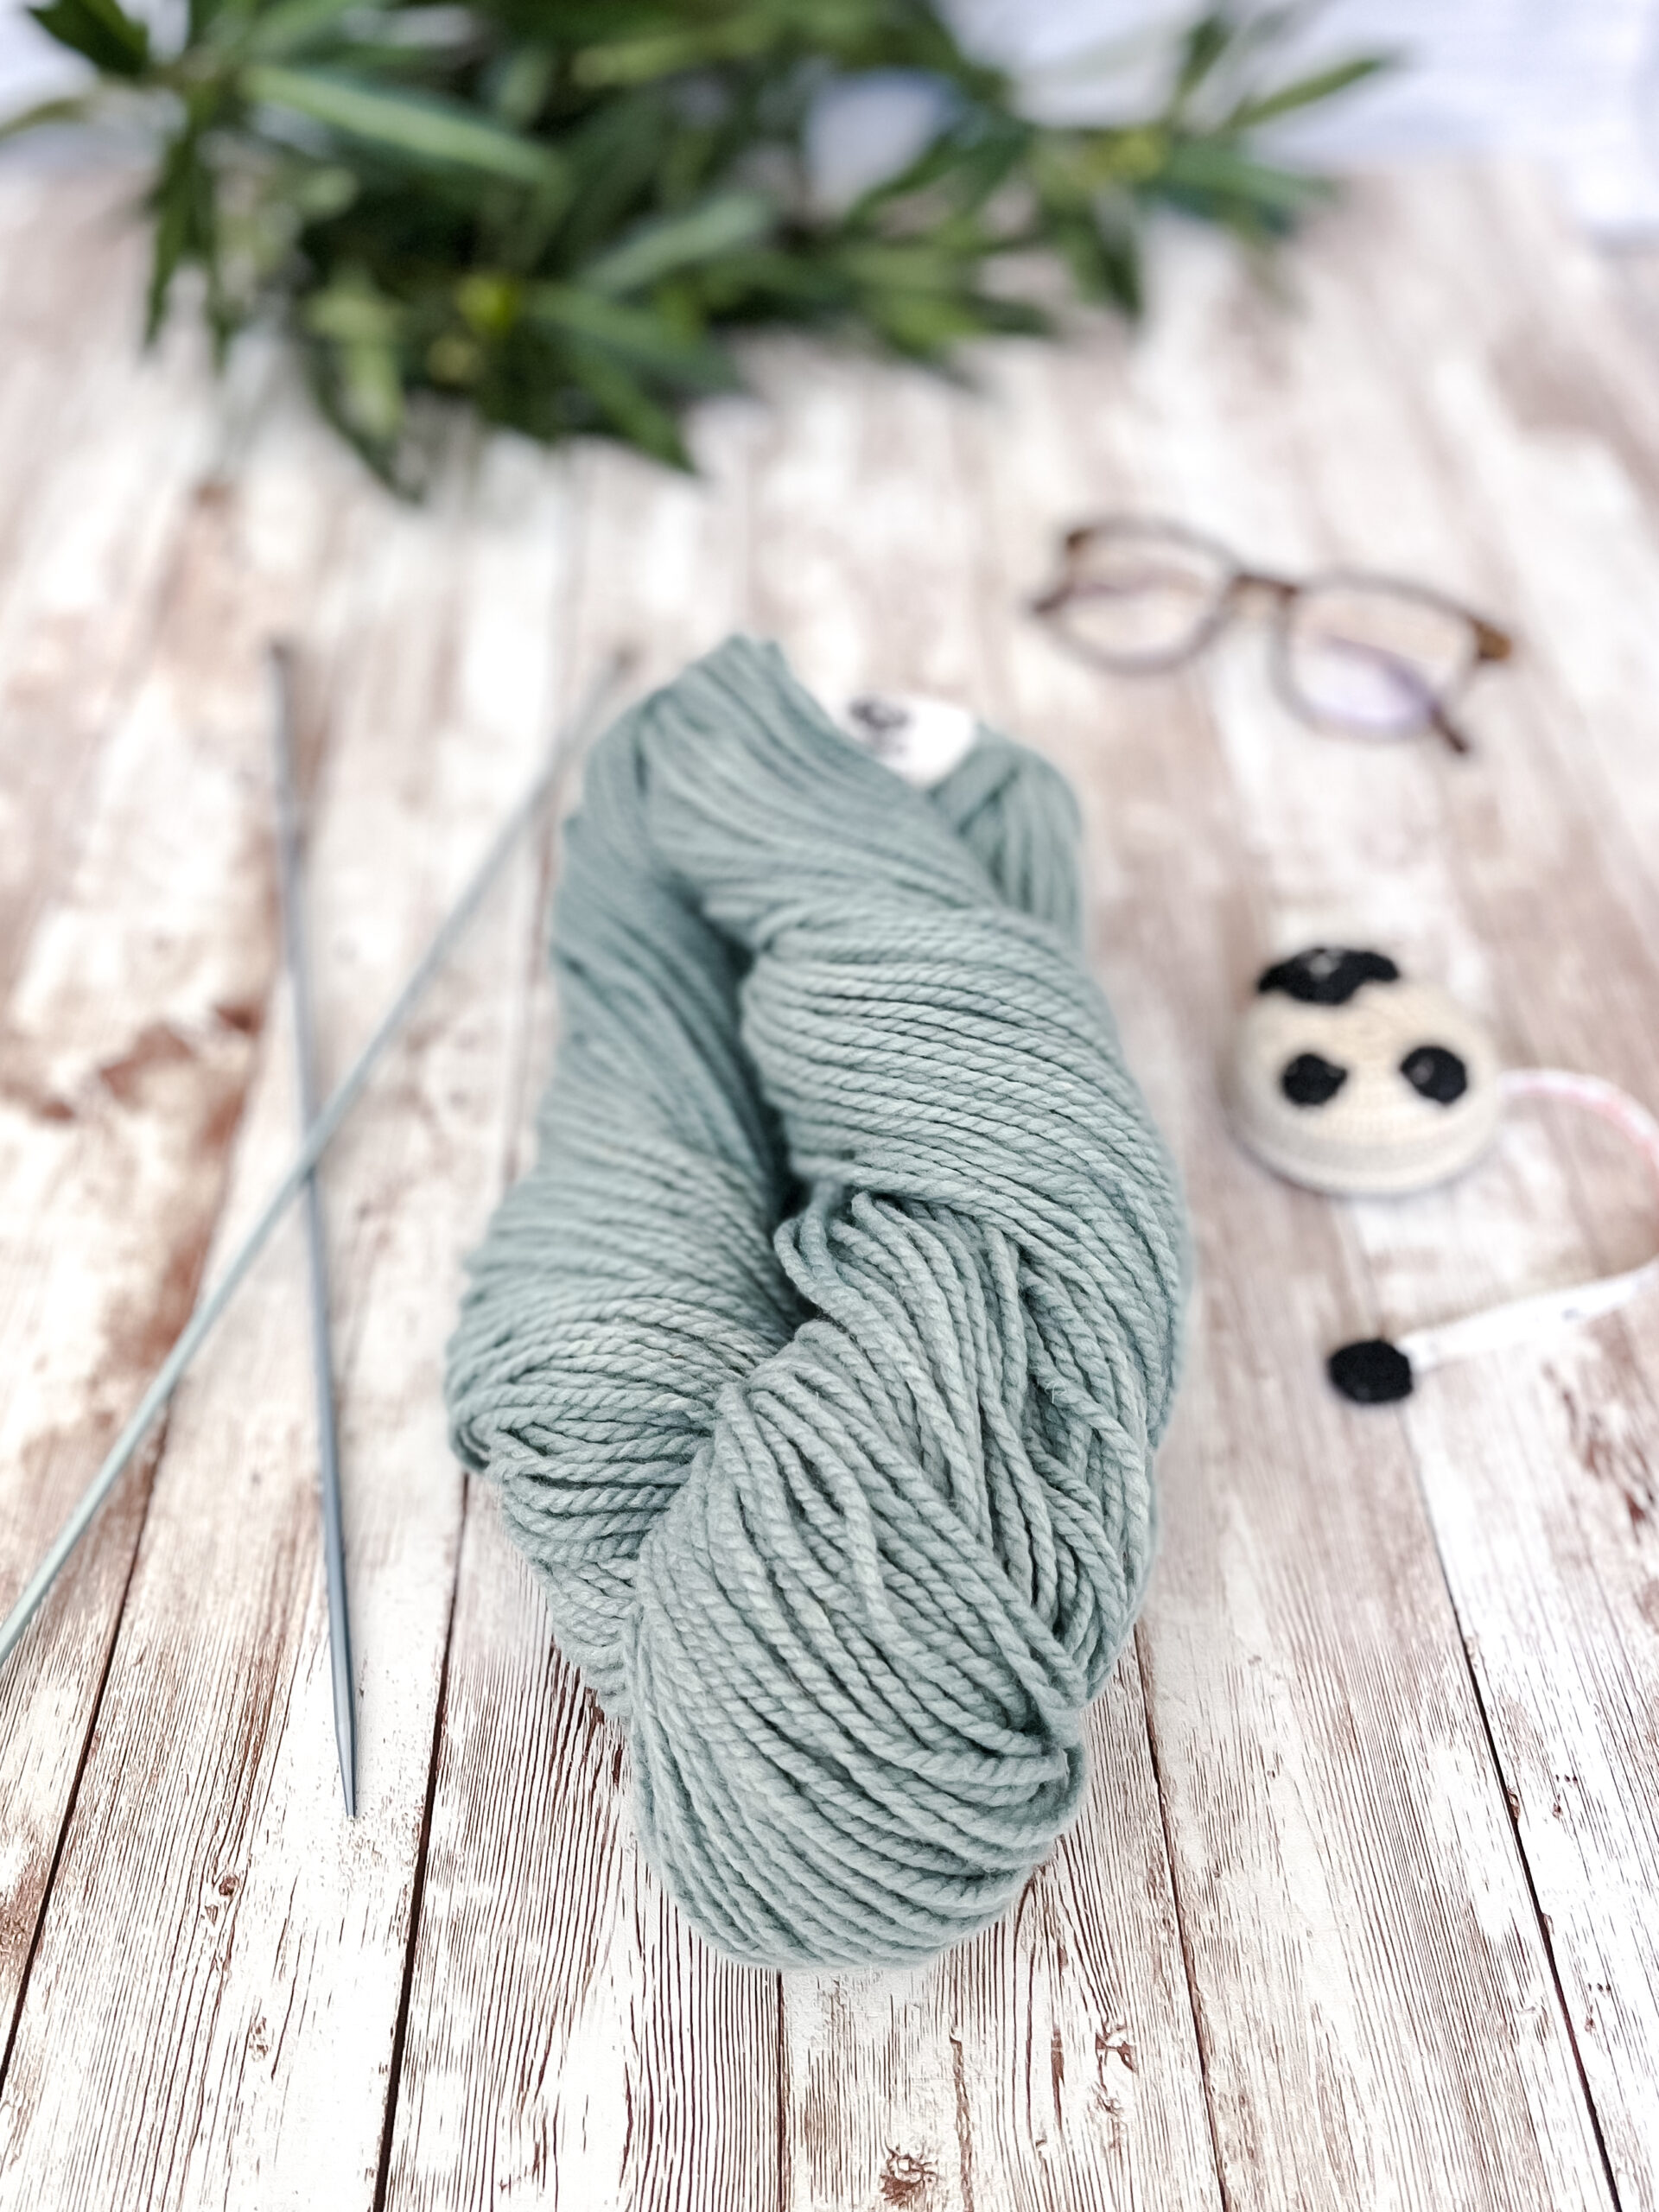 A hank of sage green, Virginia farmed fine merino yarn rests on a wood plank, with knitting needles, a sheep measuring tape, a pair of reading glasses, and some greenery around it